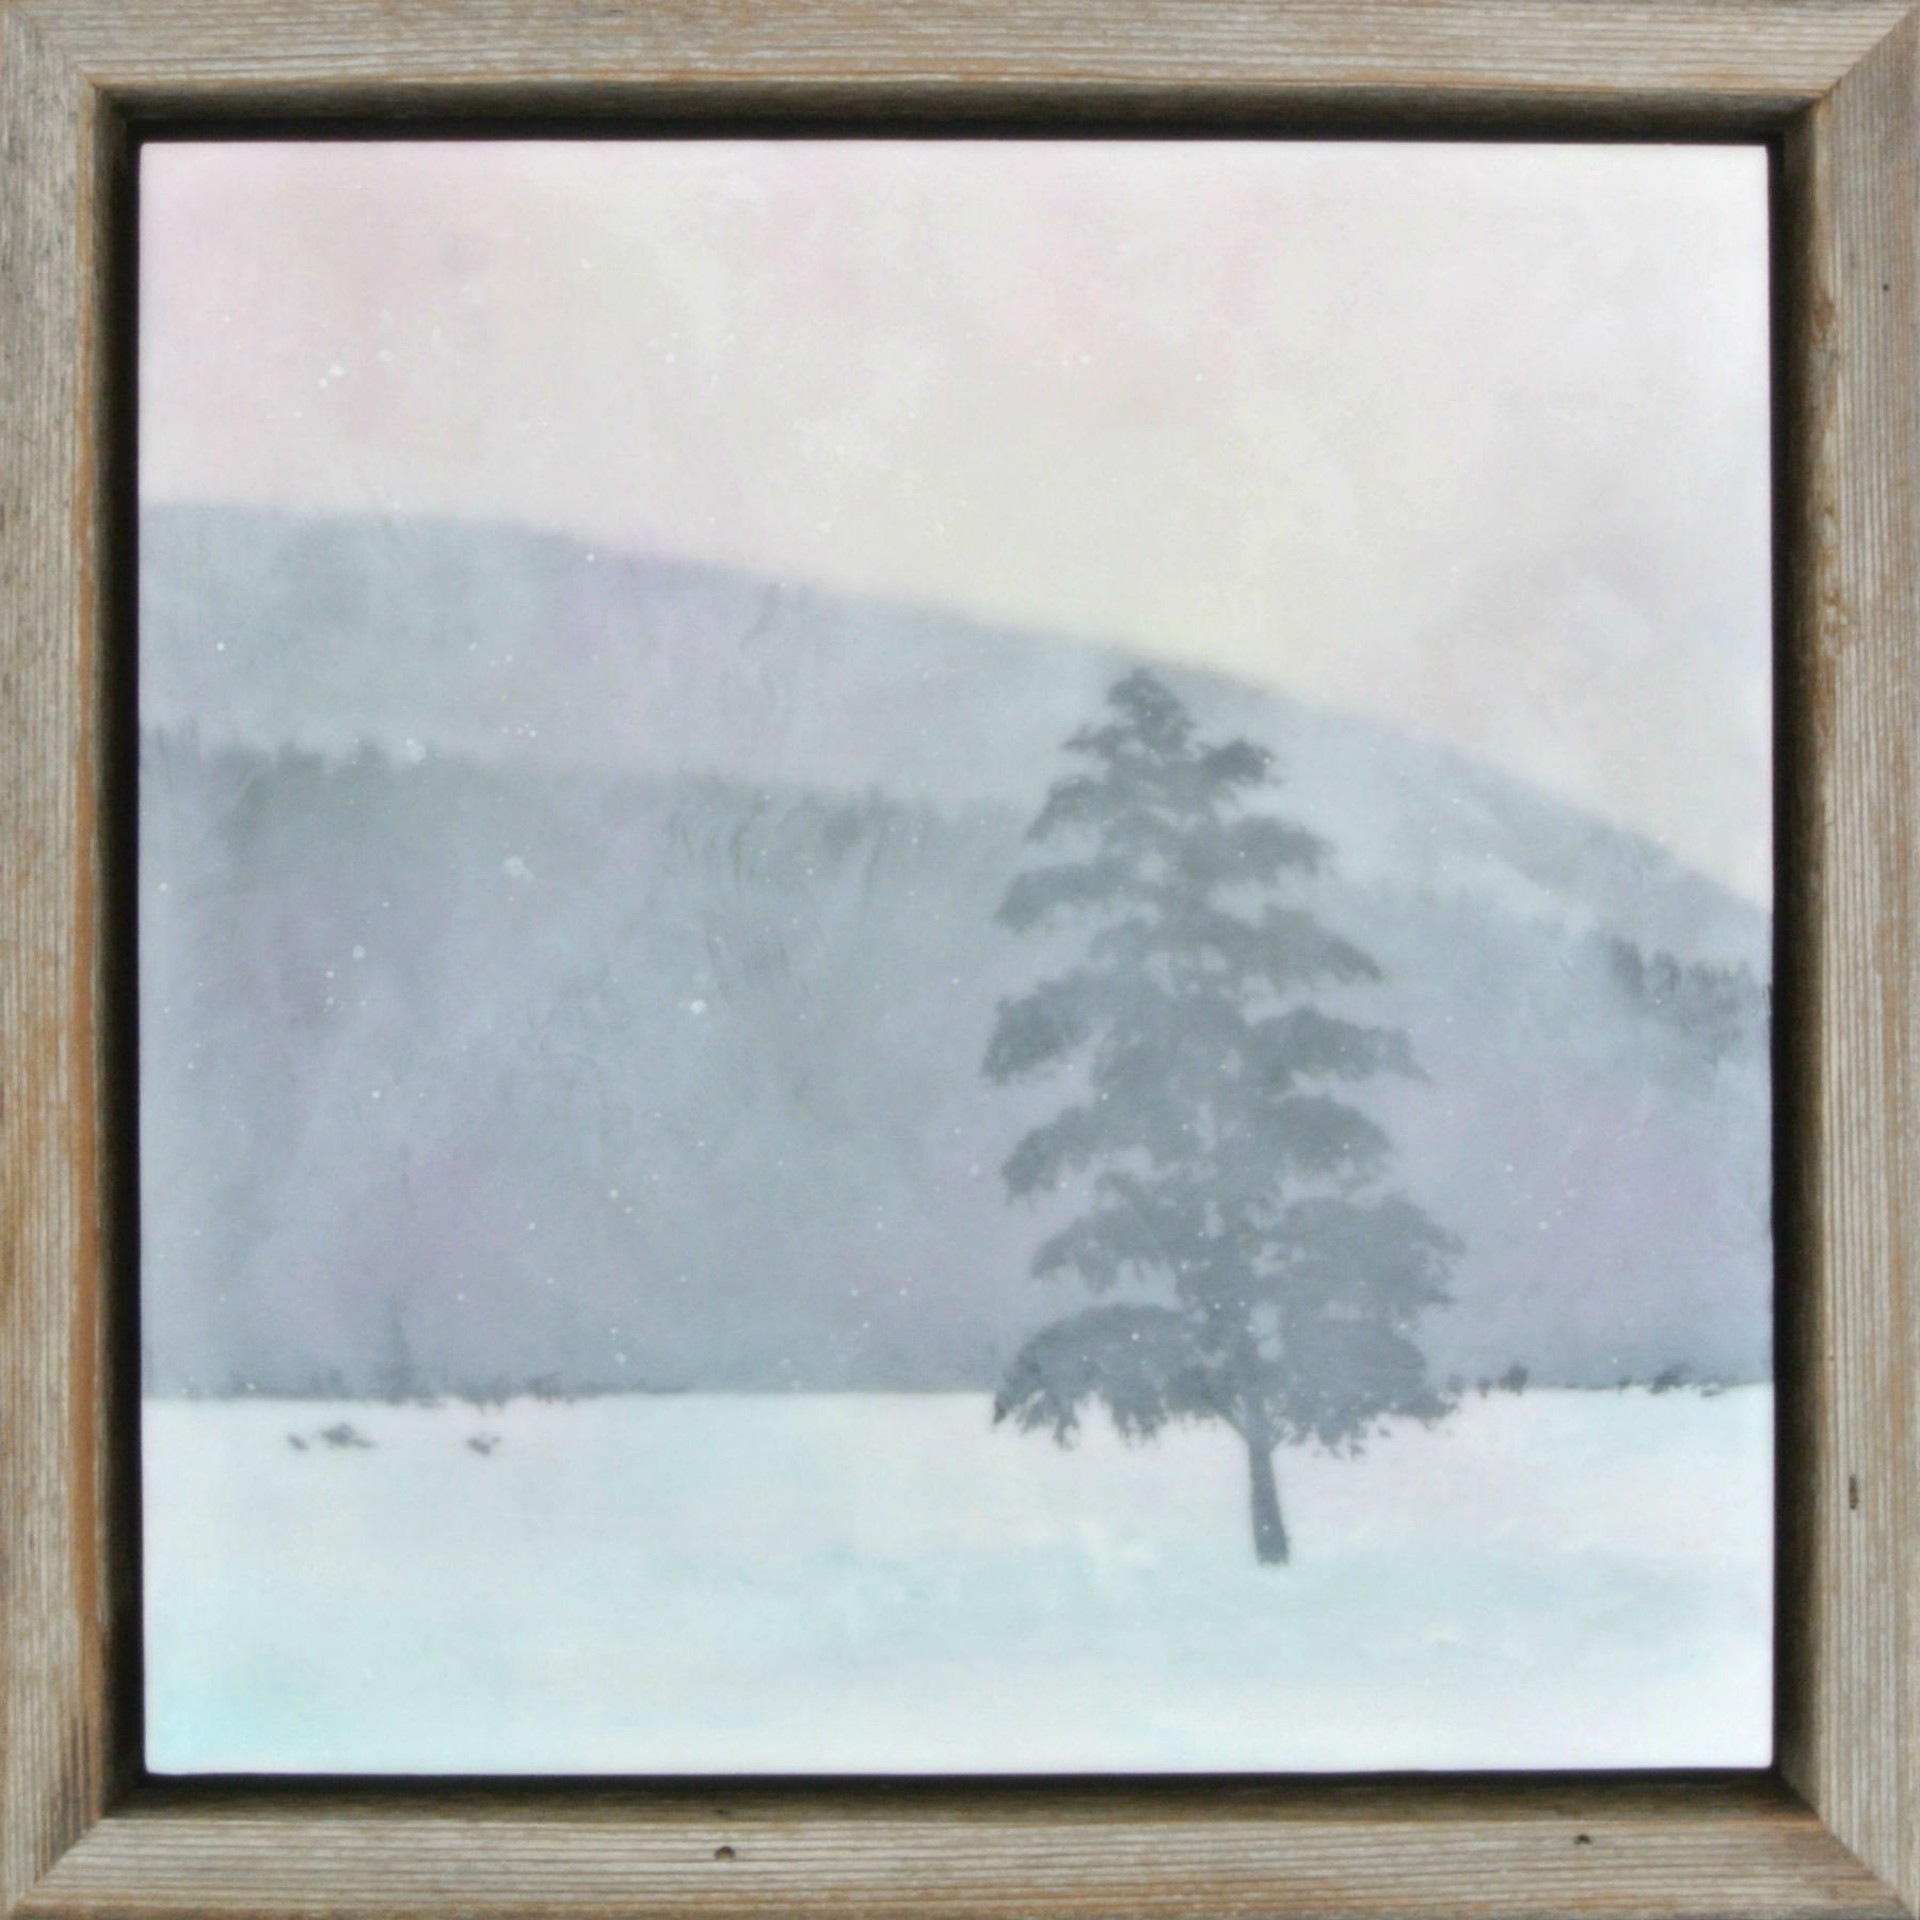 A Contemporary Encaustic Painting By Bridgette Meinhold Featuring A Lone Tree Set Against A Snowy Mountain Background